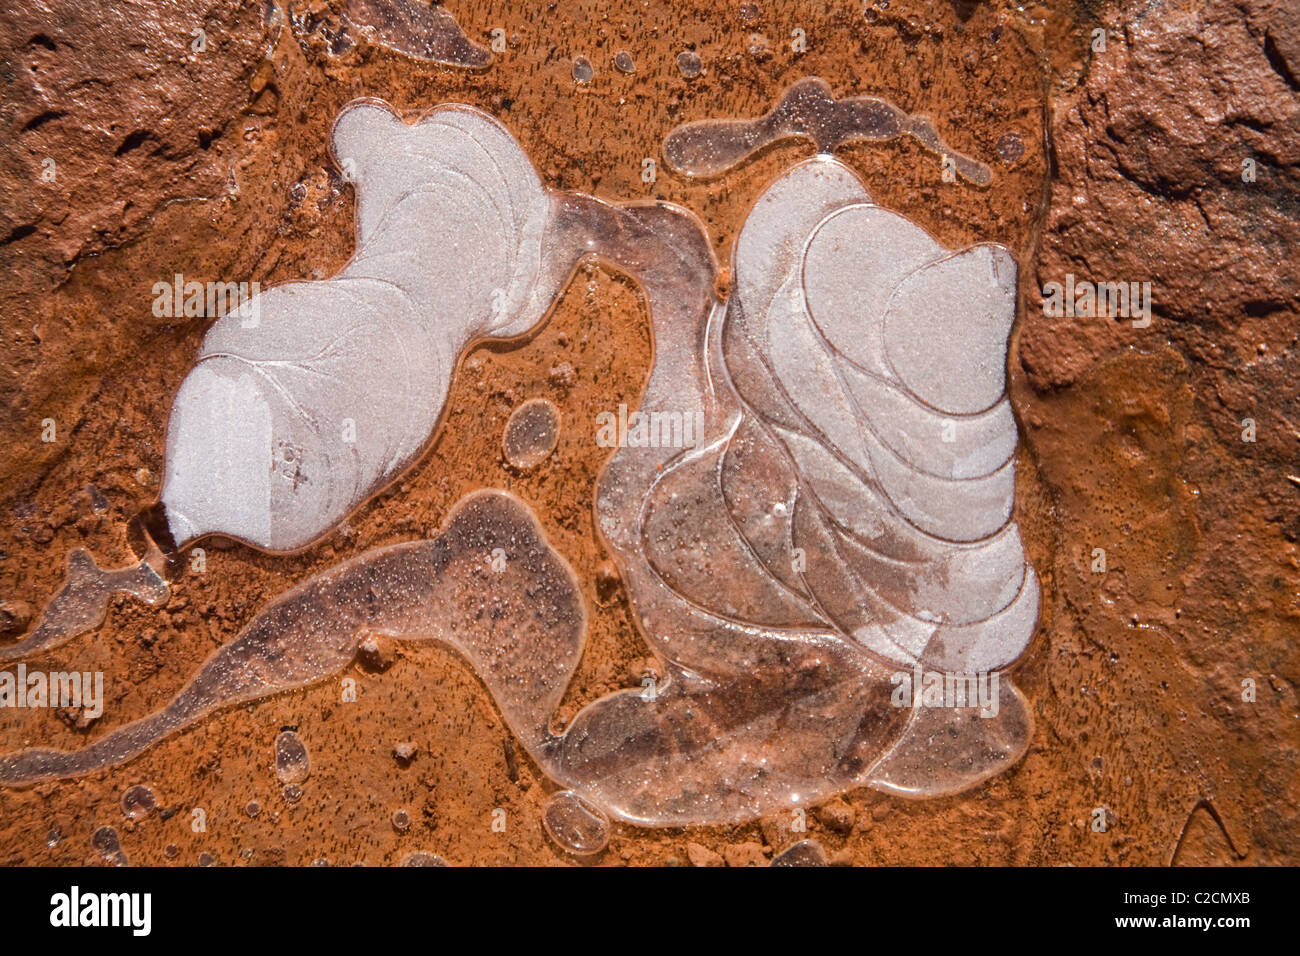 Water freezes in artistic shapes on the rocks in Sedona, Arizona. Stock Photo